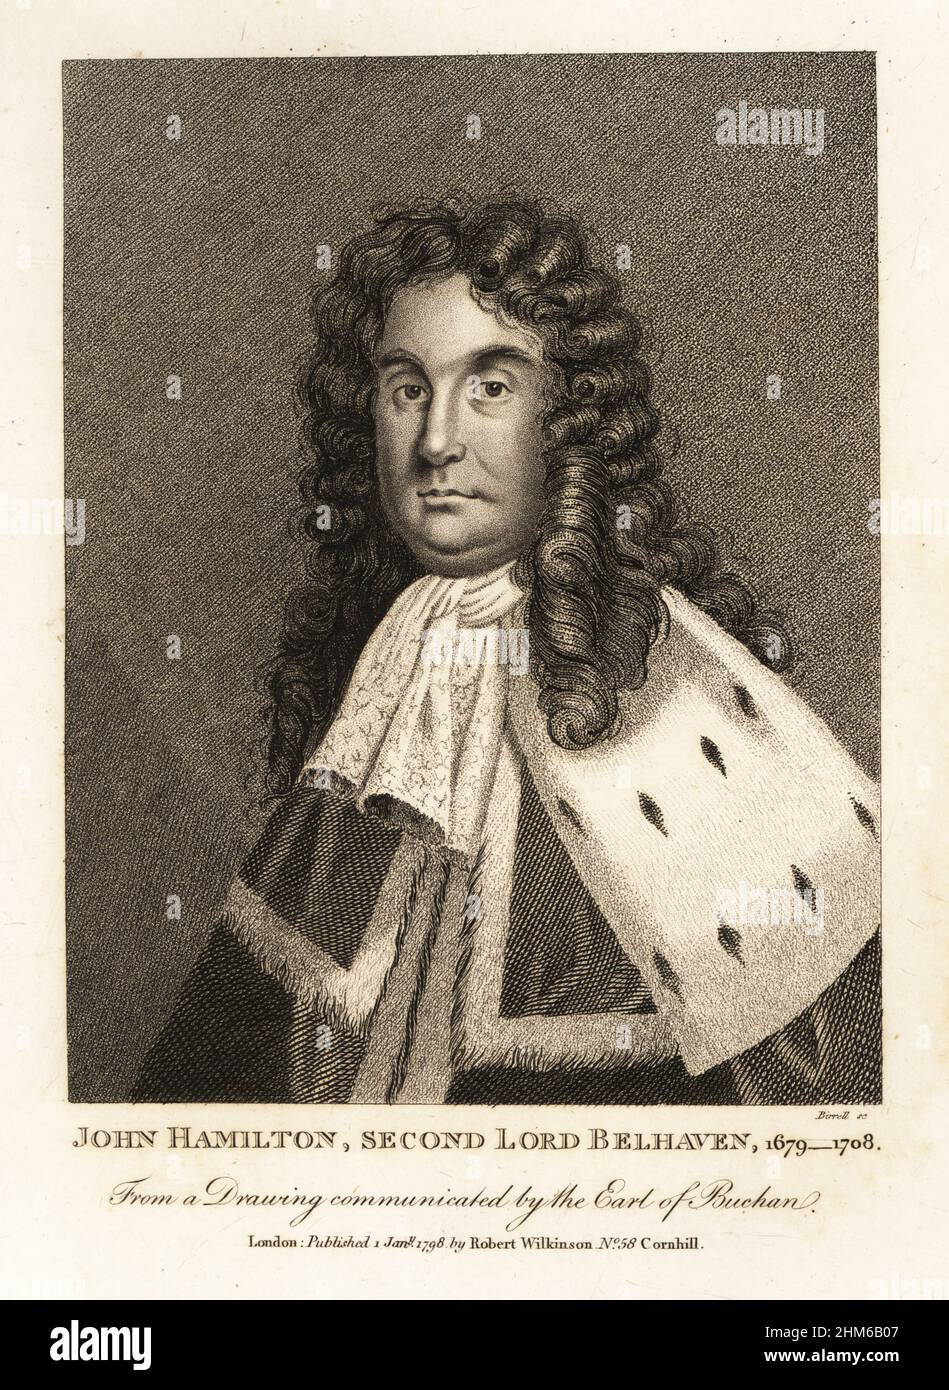 John Hamilton, Second Earl Belhaven, 1656-1708. Scottish peer, landowner and politician. Depicted in ermine cloak and fur-lined robes. After a portrait in oils by John Medina. Copperplate engraving by Andrew Birrell from John Smith’s Iconographia Scotica, or portraits of illustrious persons of Scotland, Robert Wilkinson, 58 Cornhill, London, 1798. Stock Photo